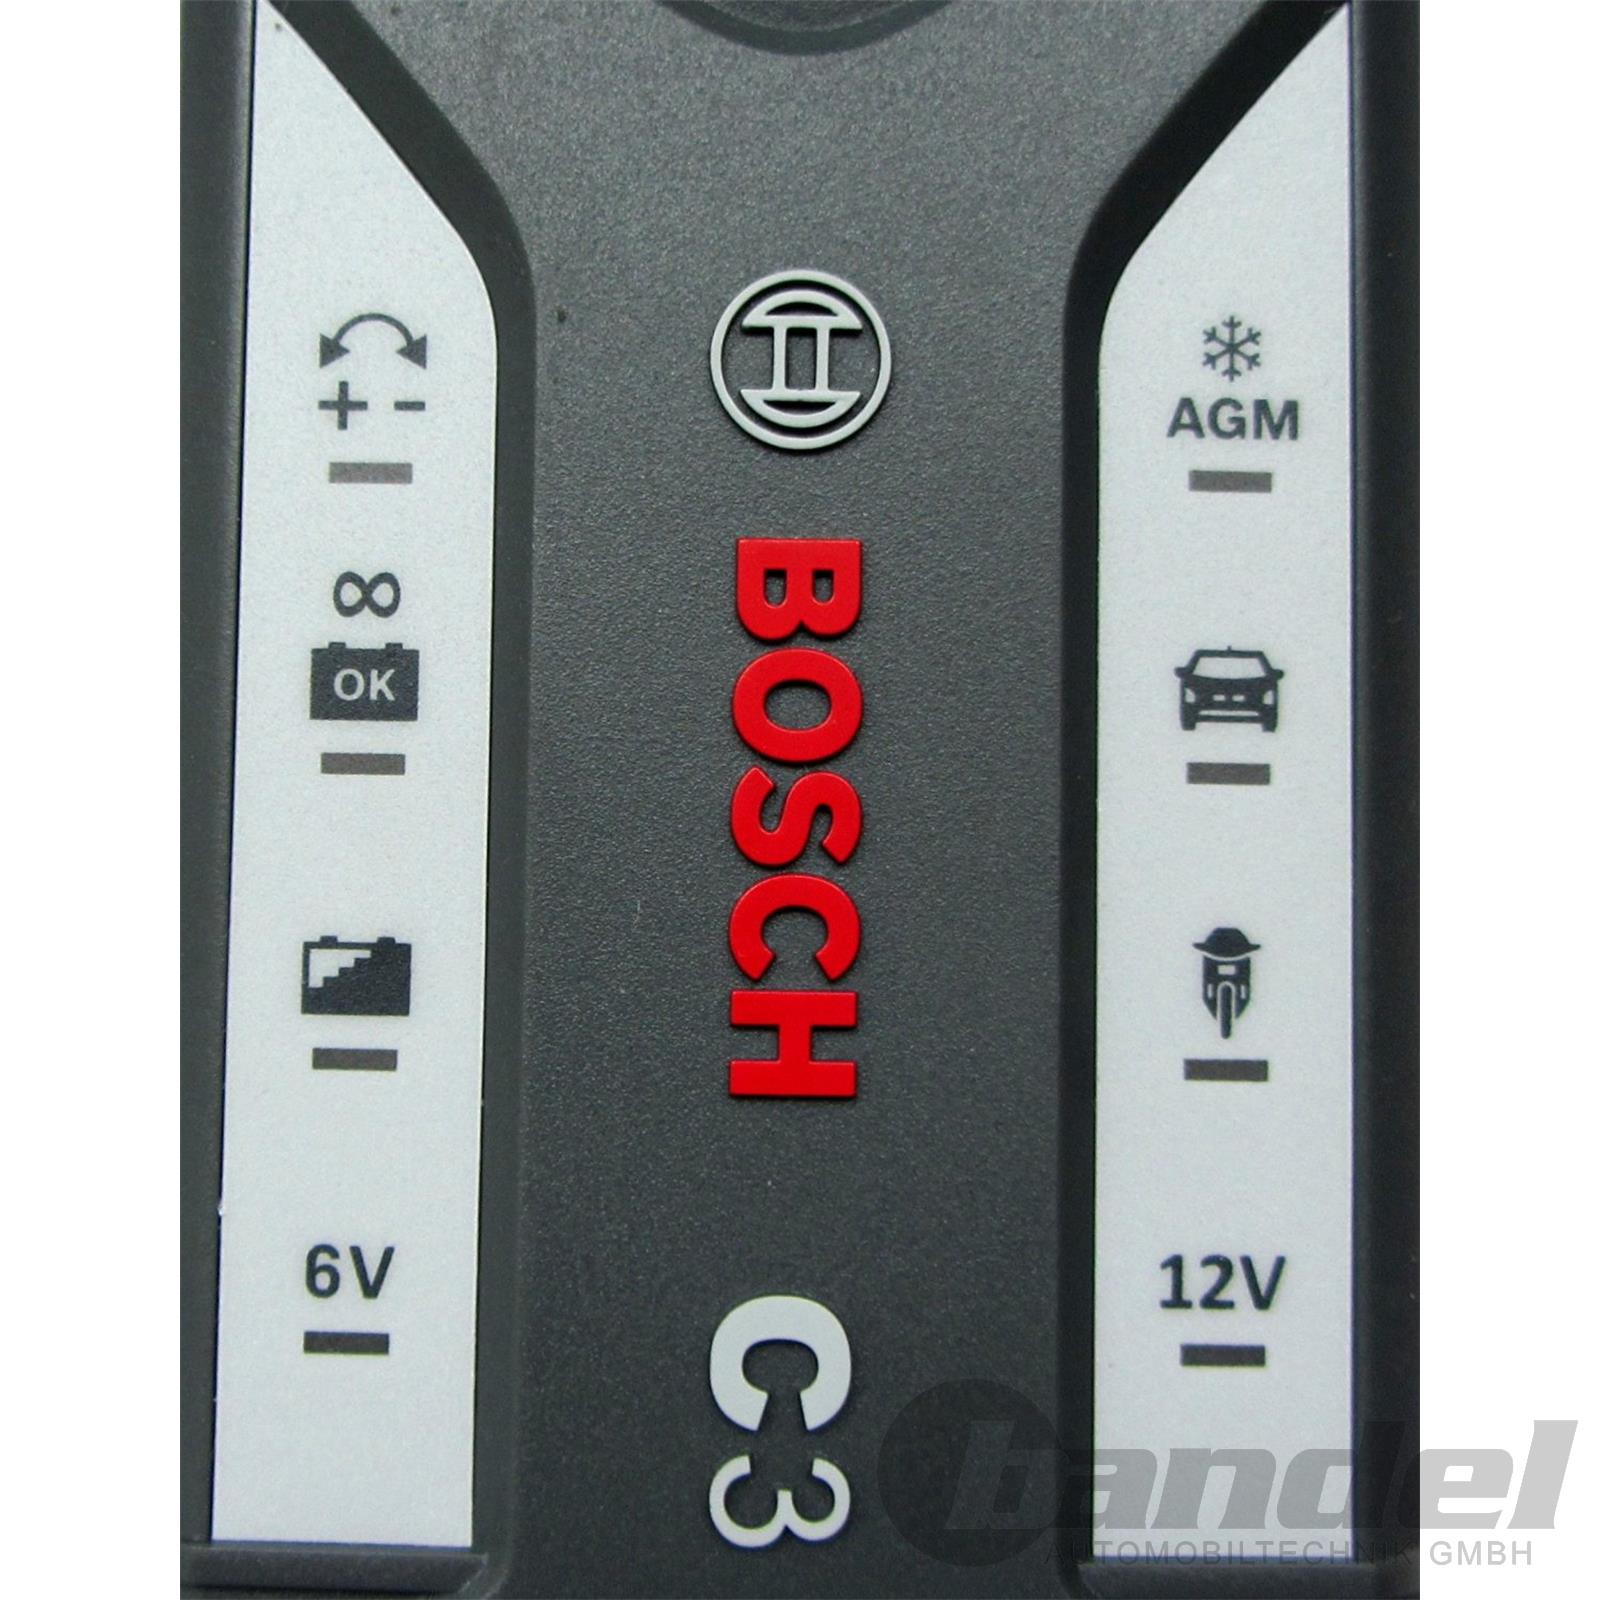  BOSCH C3 Fully Automatic 4-Mode 6/12V Smart Battery Charger and  Maintainer (3.8 Amps) : Automotive